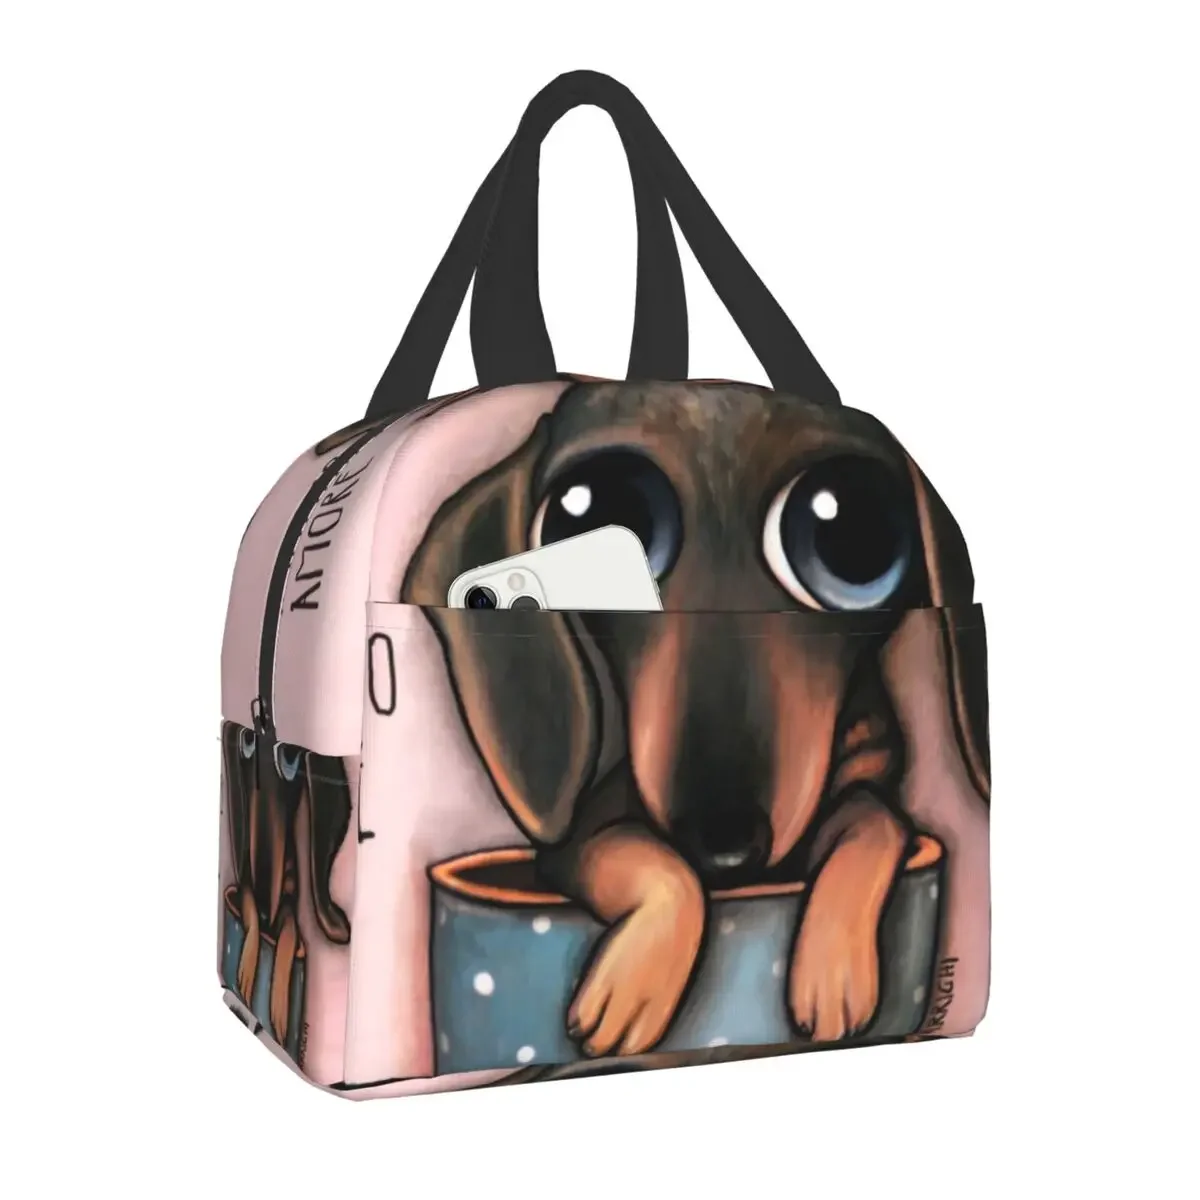 

Longhaired Dachshund Dog Insulated Lunch Bag for Women Portable Badger Sausage Wiener Thermal Cooler Lunch Box Picnic Travel